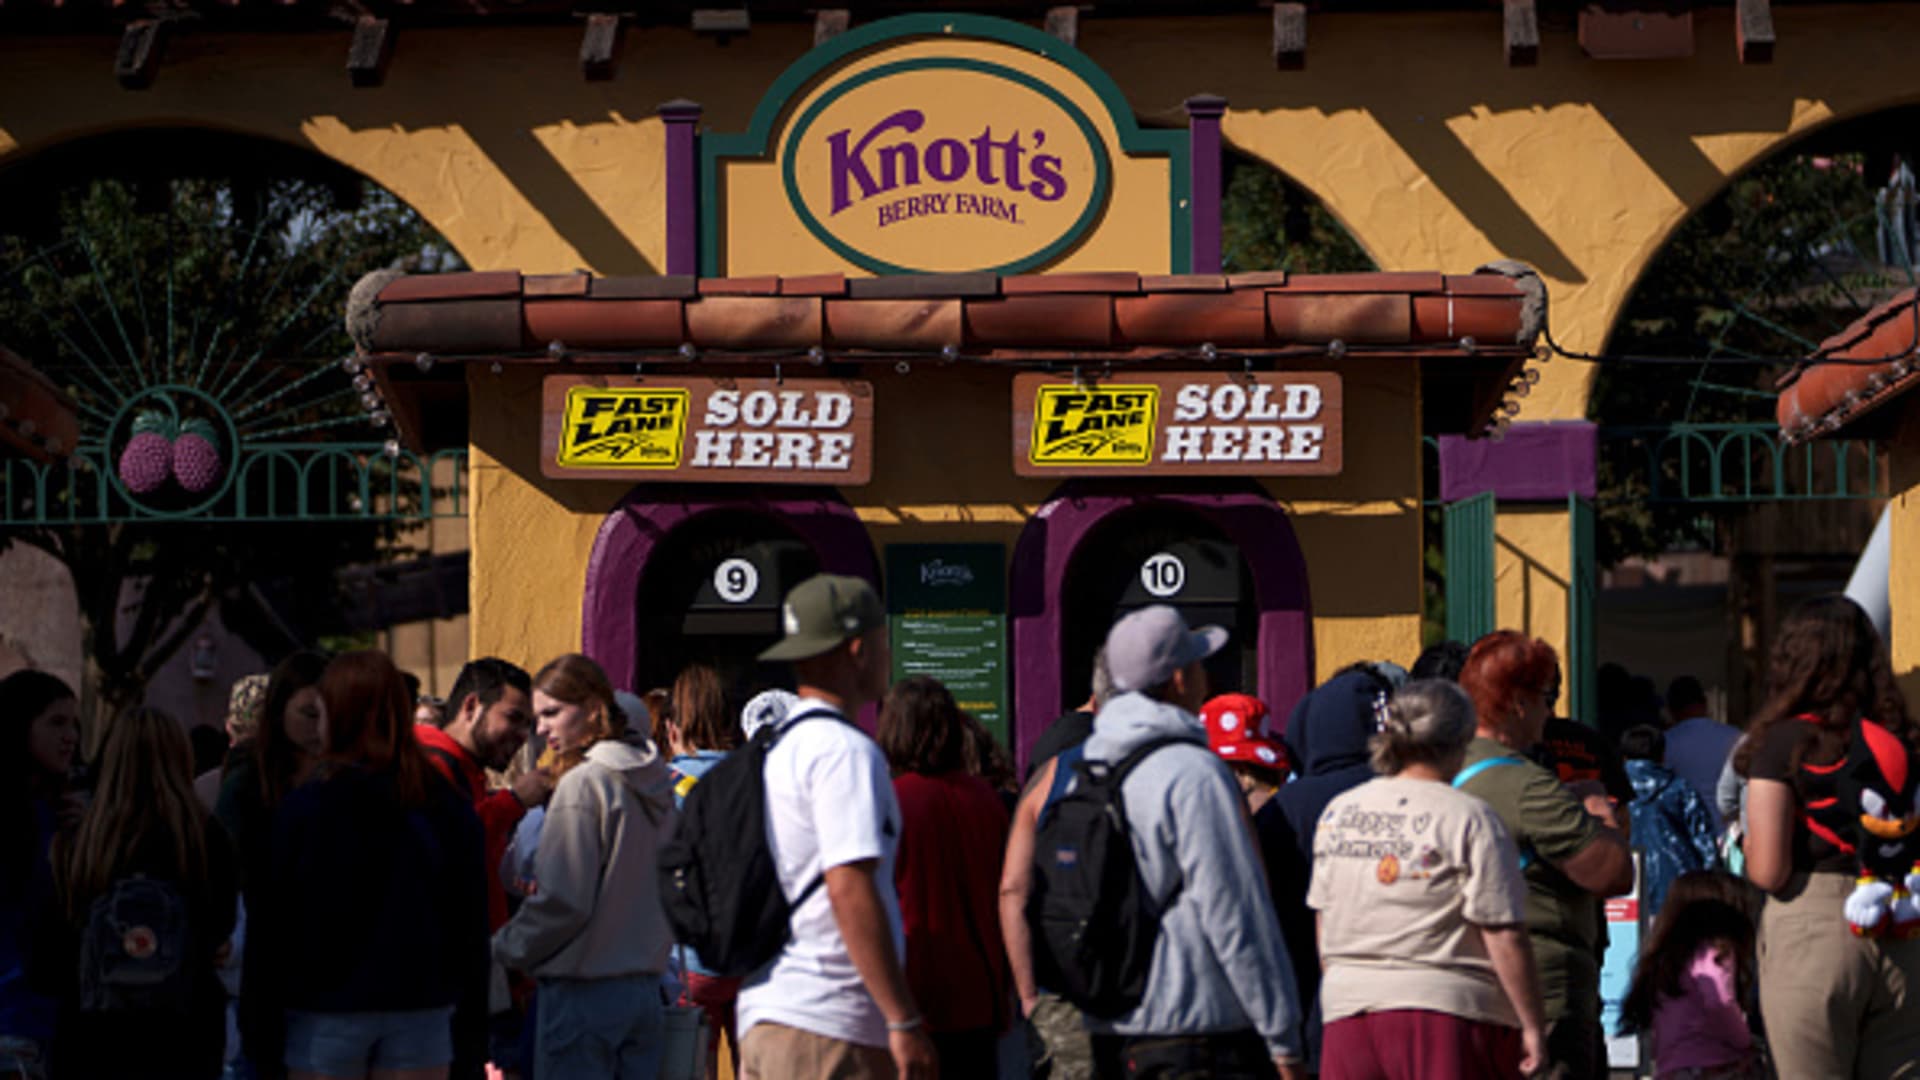 Guests wait in line to buy tickets to Knott's Berry Farm theme park, owned and operated by Cedar Fair Entertainment Co., in Buena Park, California, US, on Saturday, Nov. 4, 2023. Cedar Fair Entertainment Co. is acquiring rival Six Flags Entertainment Corp. for about $1.88 billion in a deal that will create one of the biggest theme-park operators in the Americas. Photographer: Eric Thayer/Bloomberg via Getty Images